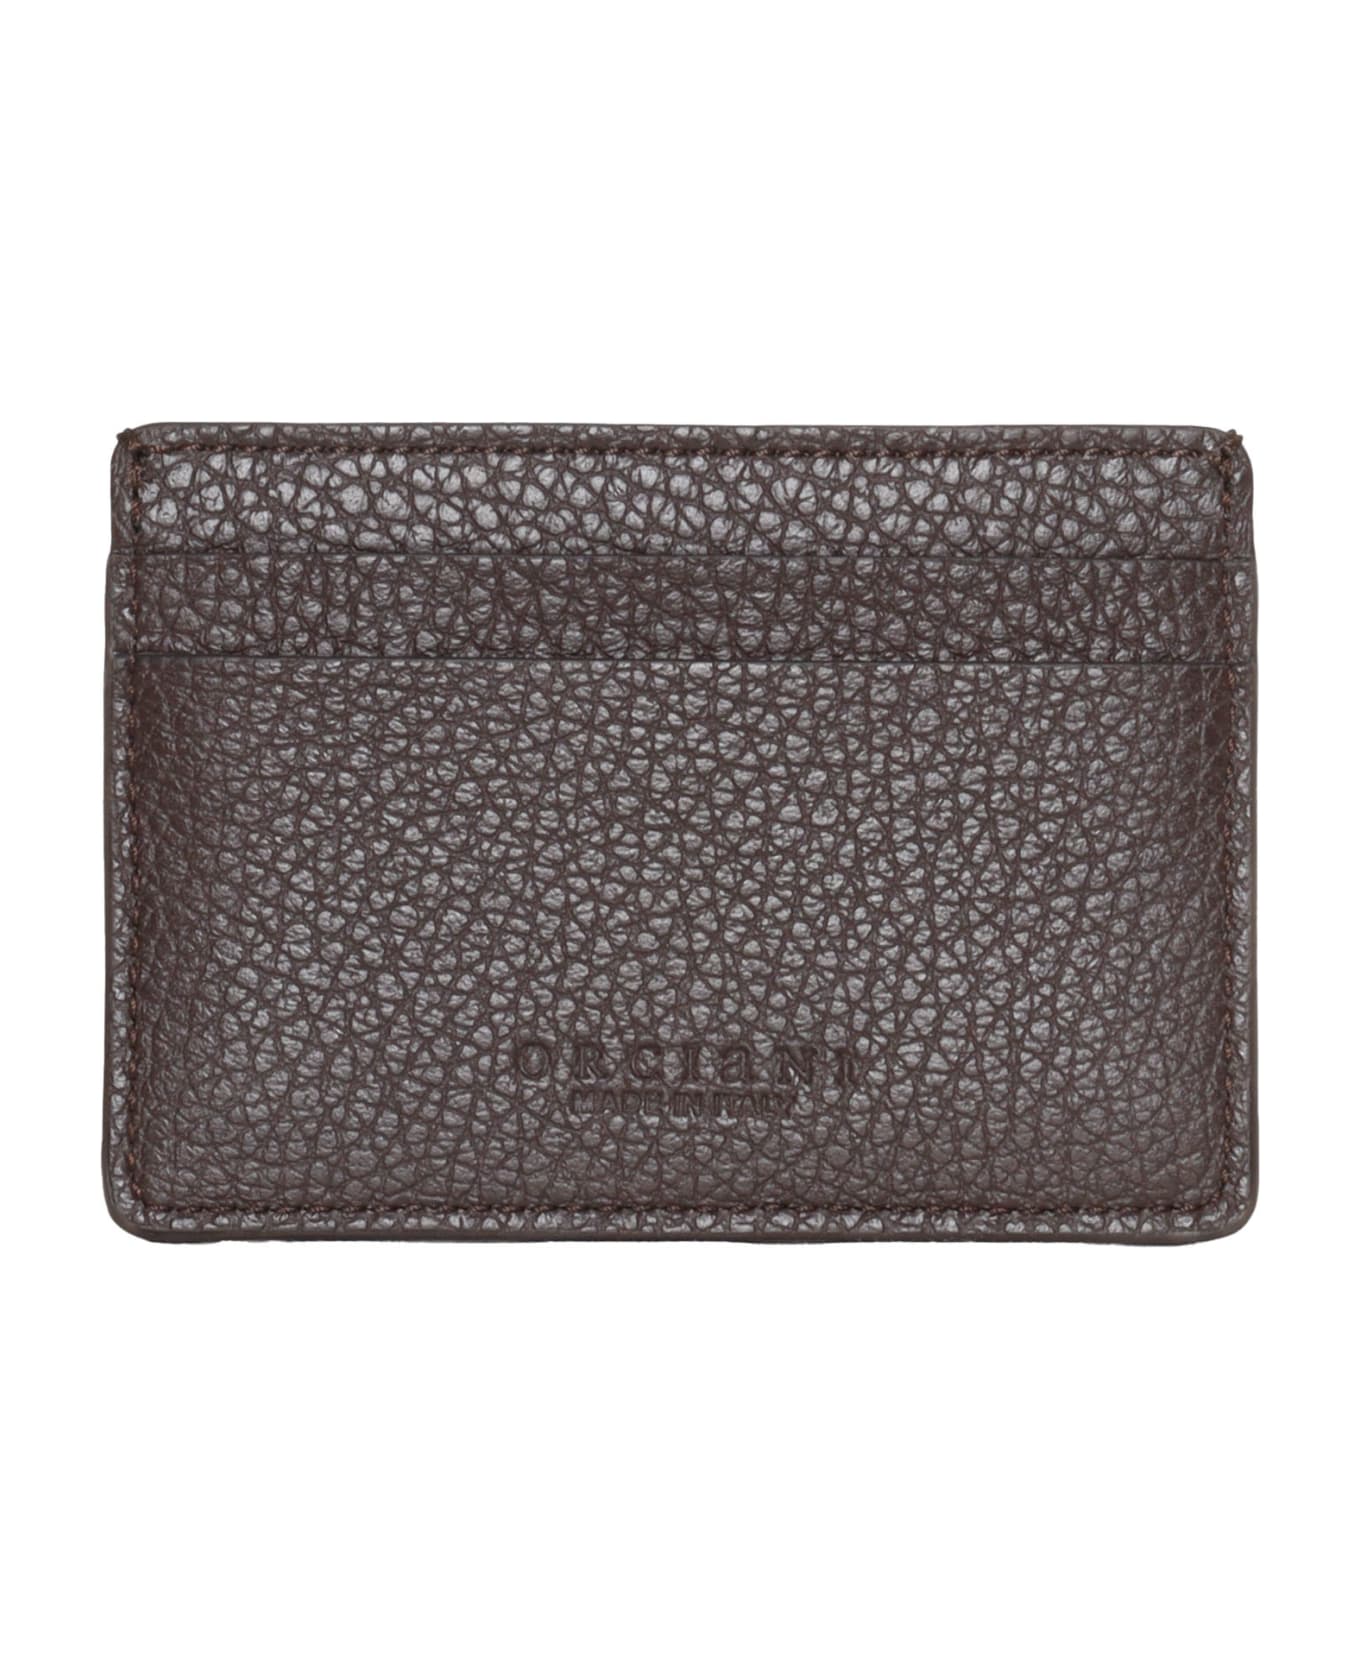 Orciani Micron Card Holder - BROWN